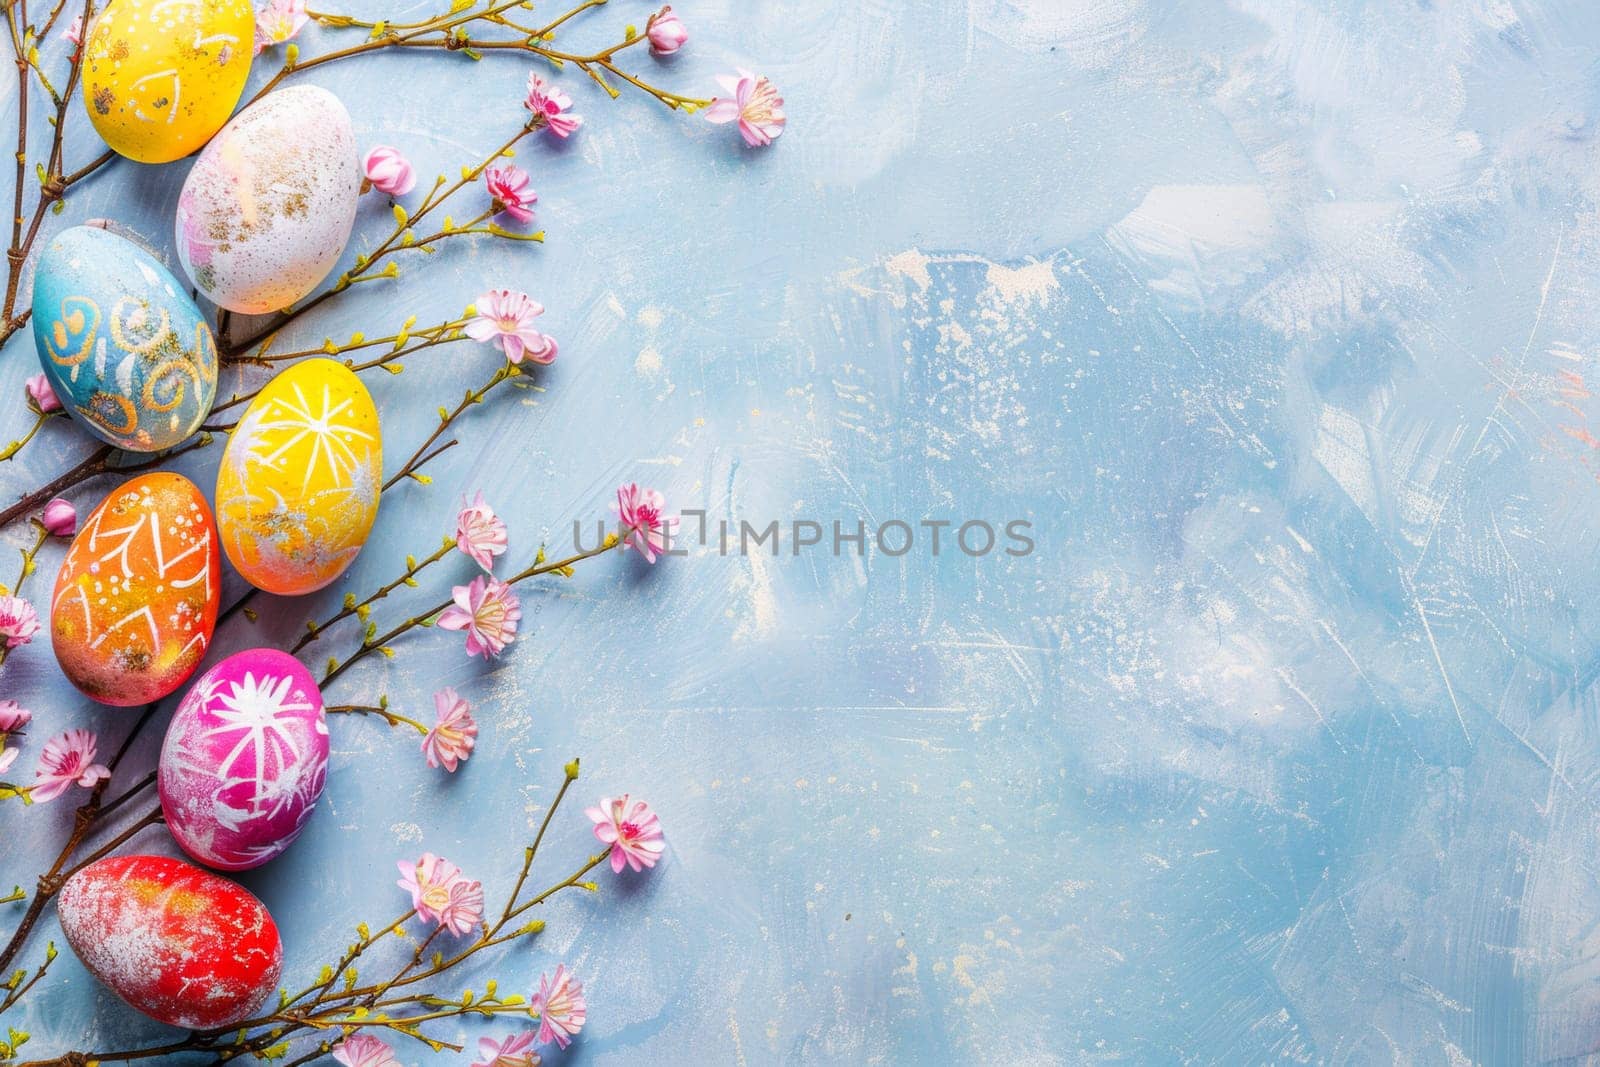 A blue background with a bunch of painted eggs and pink flowers. Scene is cheerful and colorful, with a focus on the beauty of nature